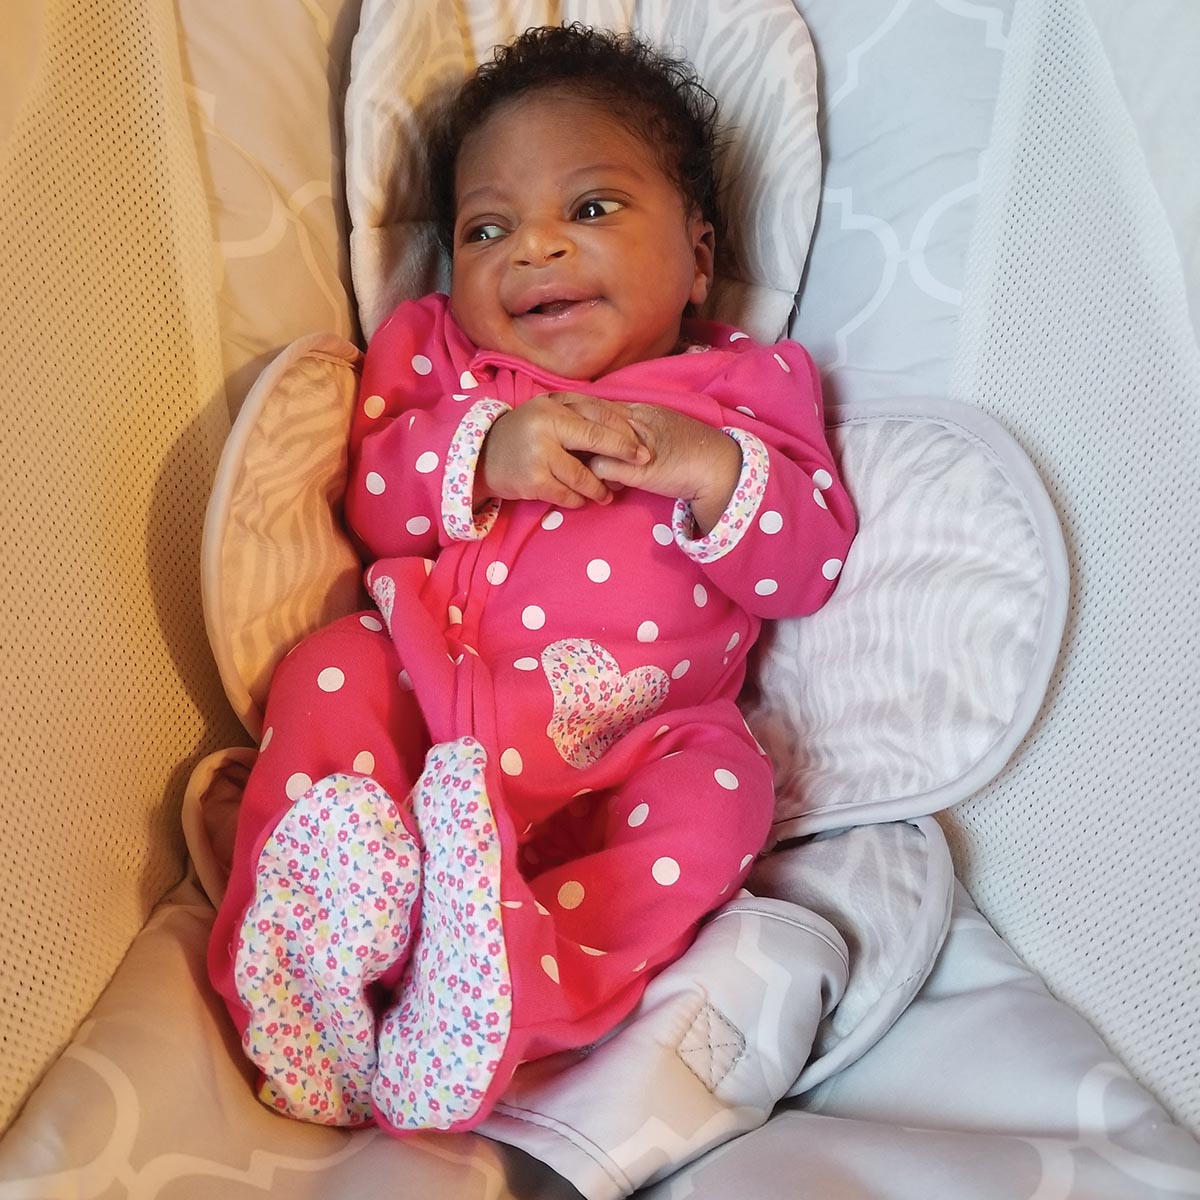 Ashley Thomas ’14 welcomed new baby Sevyn Cottrell on September 25, 2018